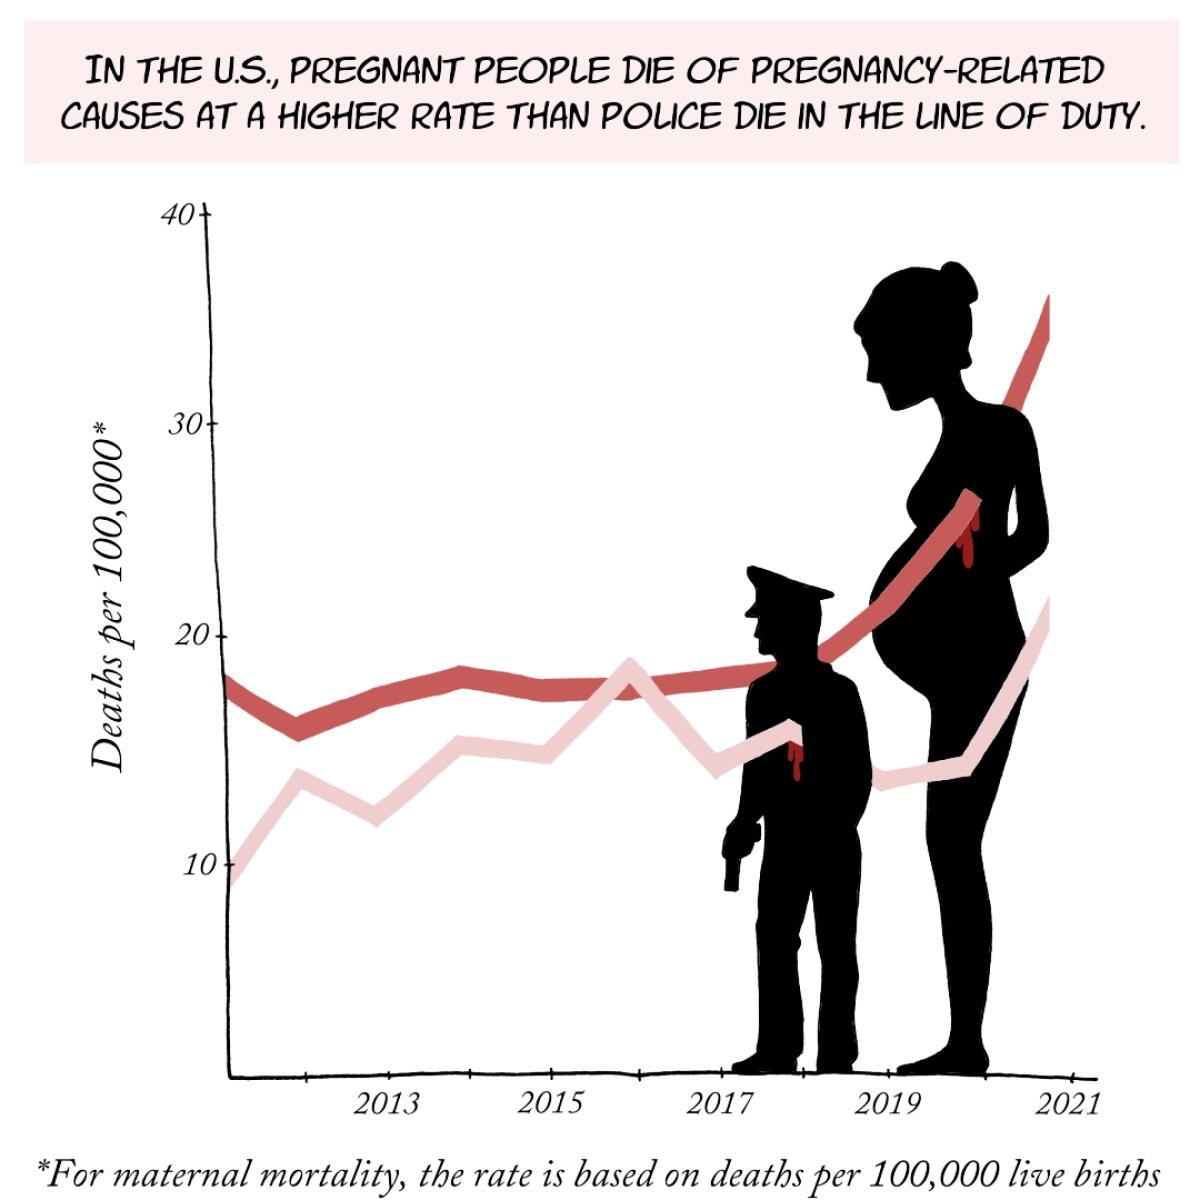 In the U.S., pregnant people die of pregnancy-related causes at a higher rate than police die in the line of duty.